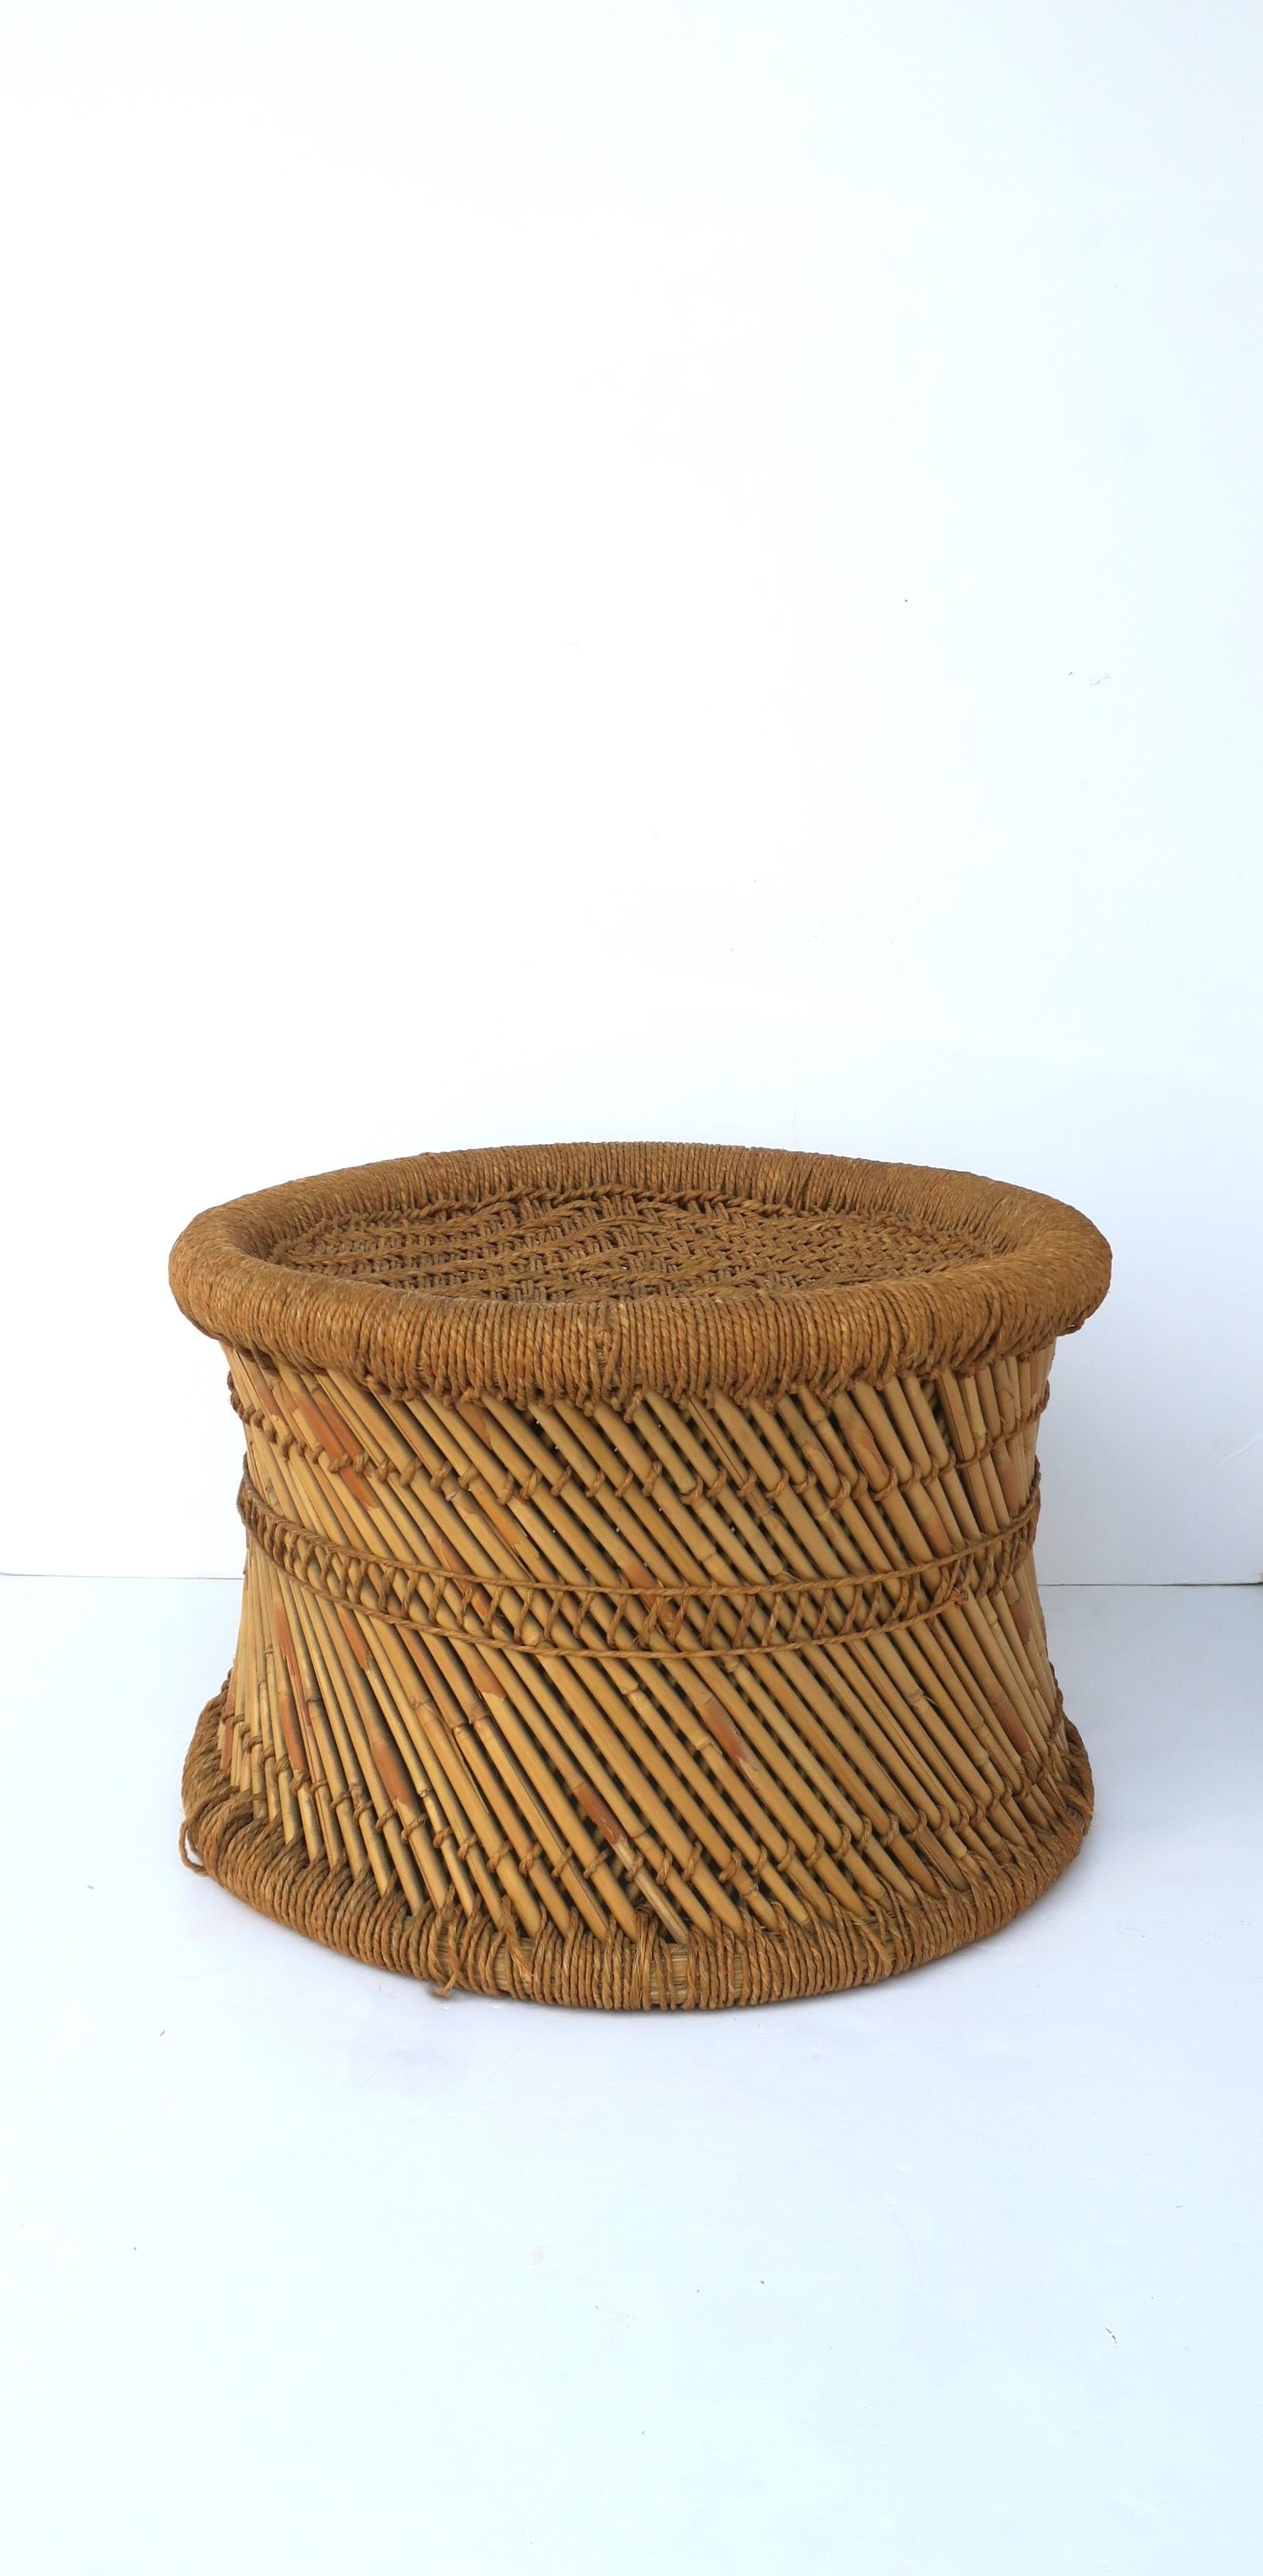 A vintage wicker pencil reed stool in the Anglo Raj style, circa mid-20th century, India. Stool is low, sturdy and well-made and can support a human being (as intended.) Stool can also double as a piece to hold books (demonstrated), a cocktail